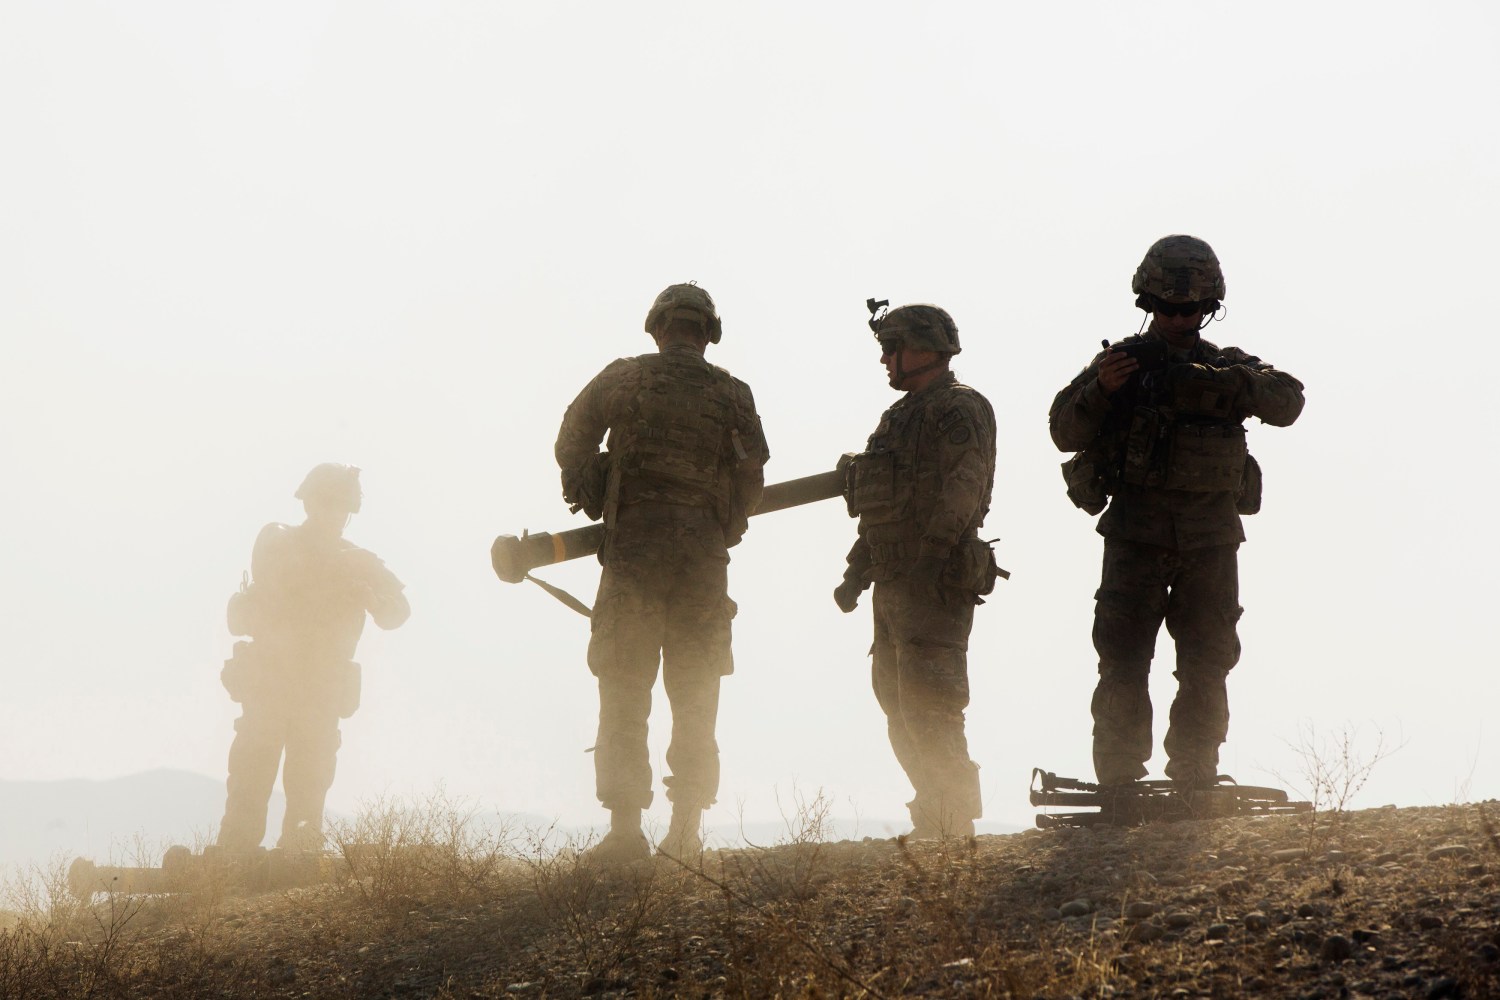 U.S. soldiers from D Troop of the 3rd Cavalry Regiment walk on a hill after finishing with a training exercise near forward operating base Gamberi in the Laghman province of Afghanistan December 30, 2014. REUTERS/Lucas Jackson (AFGHANISTAN - Tags: CIVIL UNREST POLITICS MILITARY TPX IMAGES OF THE DAY) - GM1EACU19K101